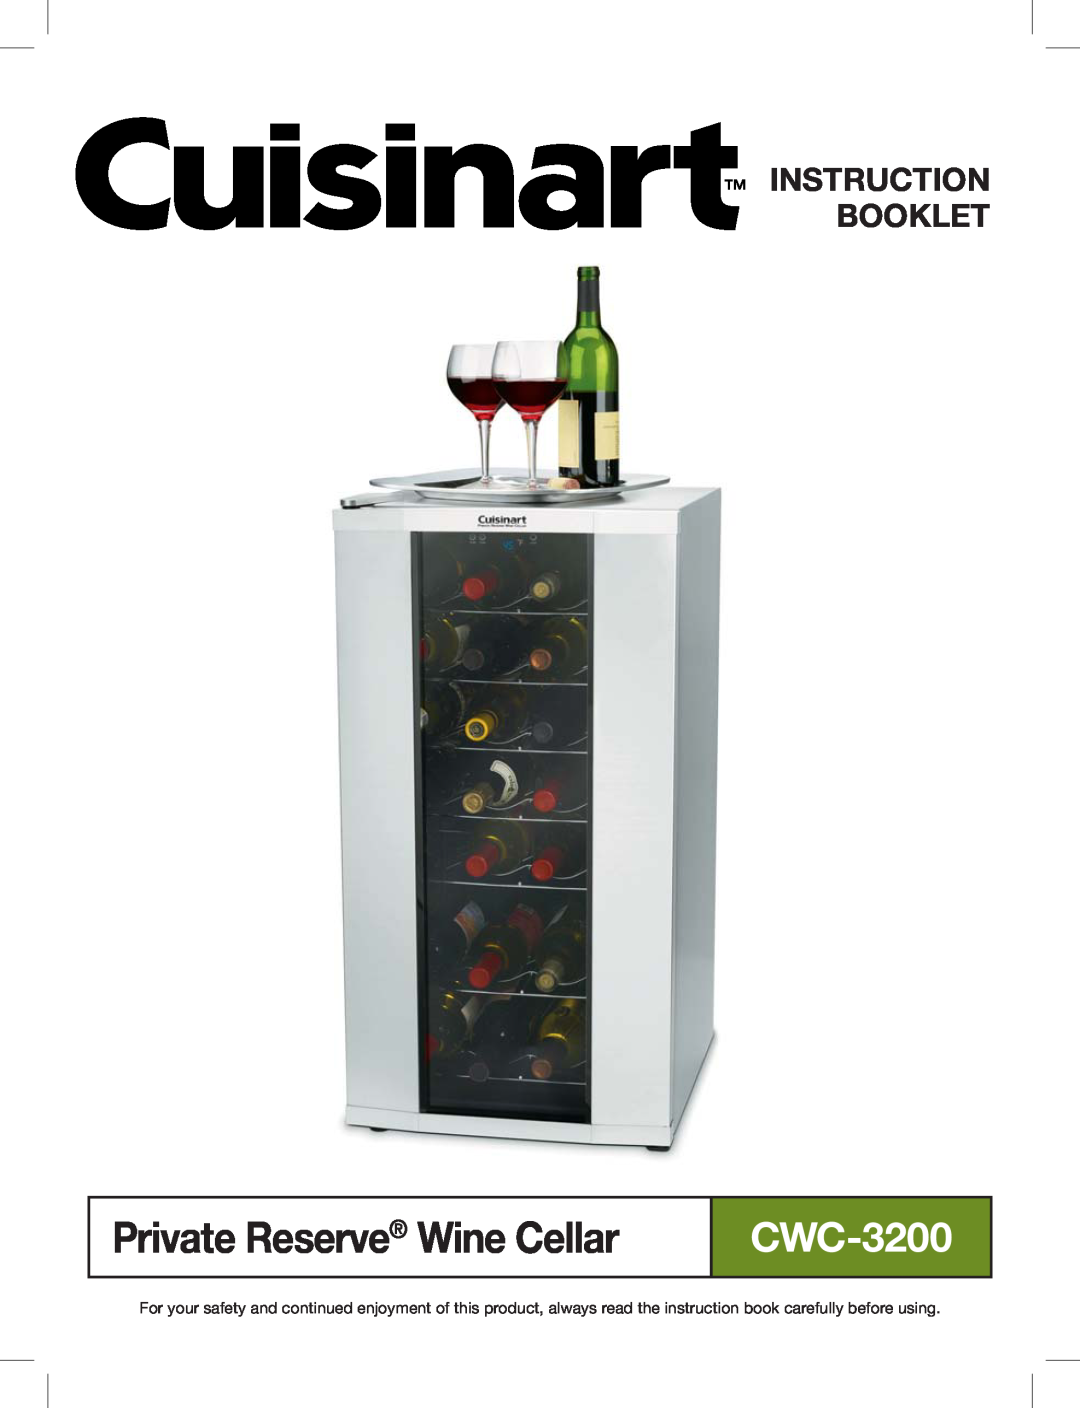 Cuisinart CWC-3200 manual Instruction Booklet, Private Reserve Wine Cellar 